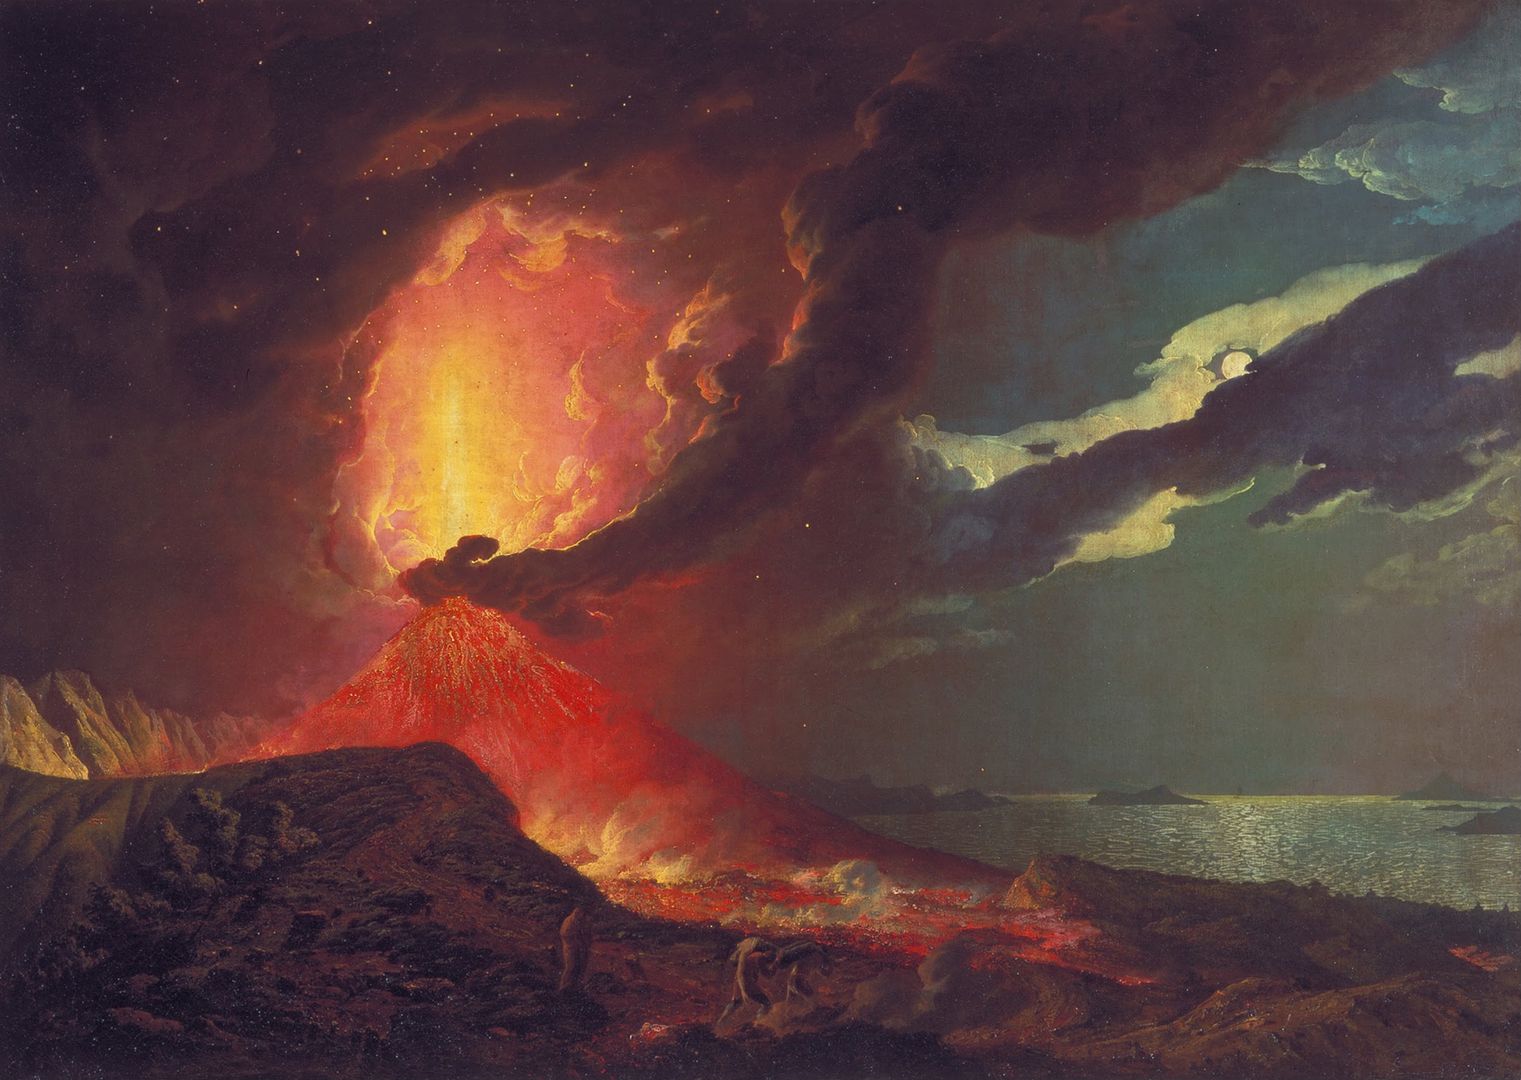 Joseph_Wright_of_Derby_-_Vesuvius_in_Eruption_with_a_View_over_the_Islands_in_the_Bay_of_Naples_-_Google_Art_Project_zpsa5b777bd.jpg